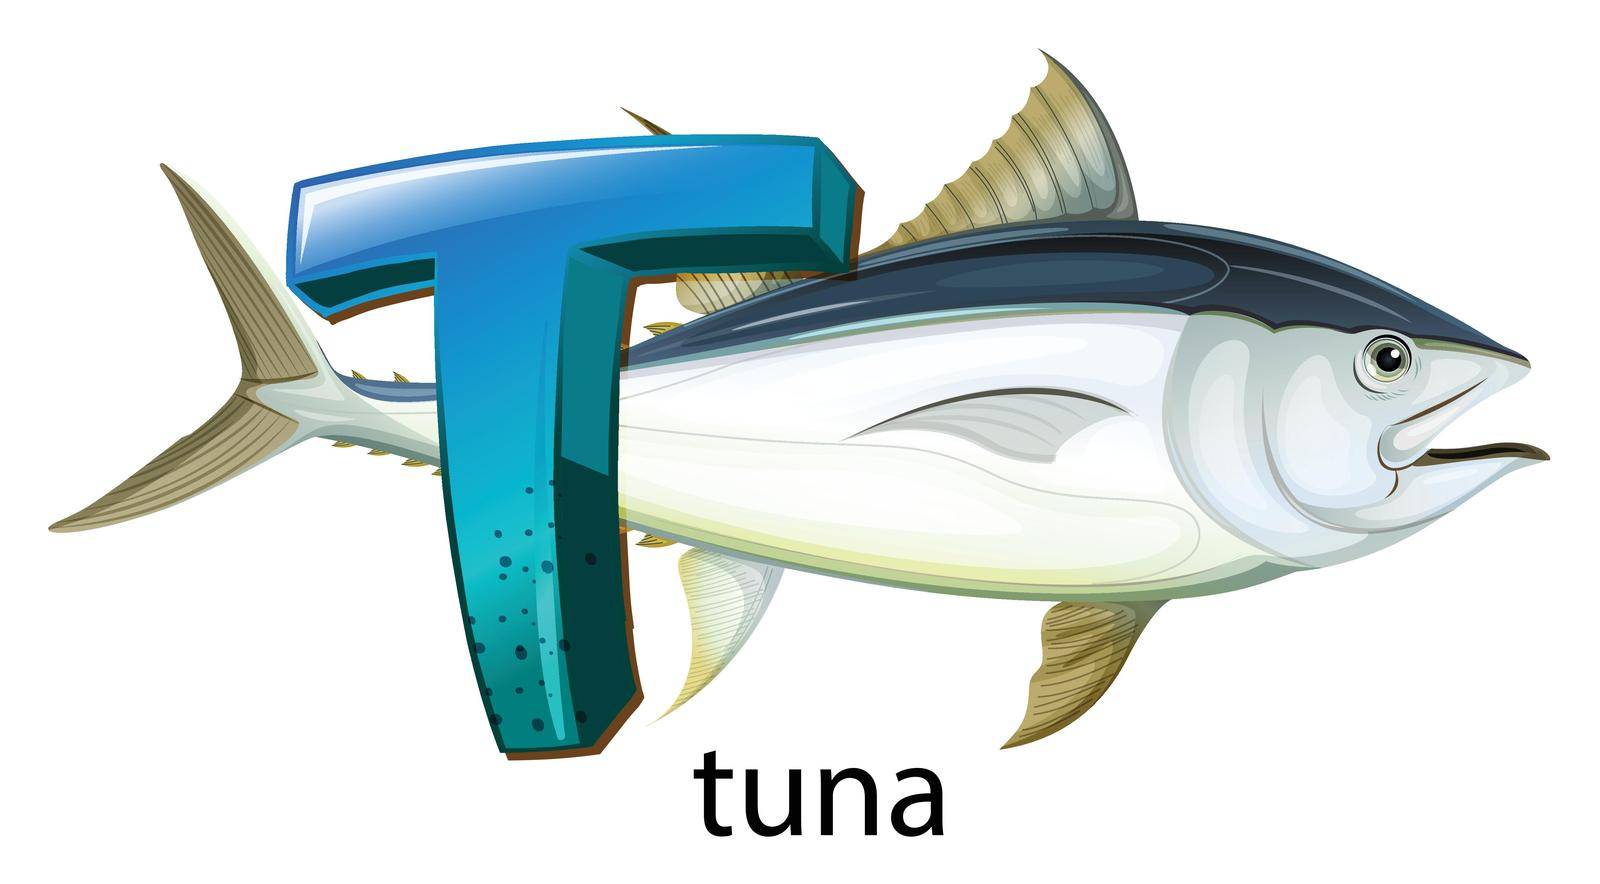 Illustration of a letter T for tuna on a white background